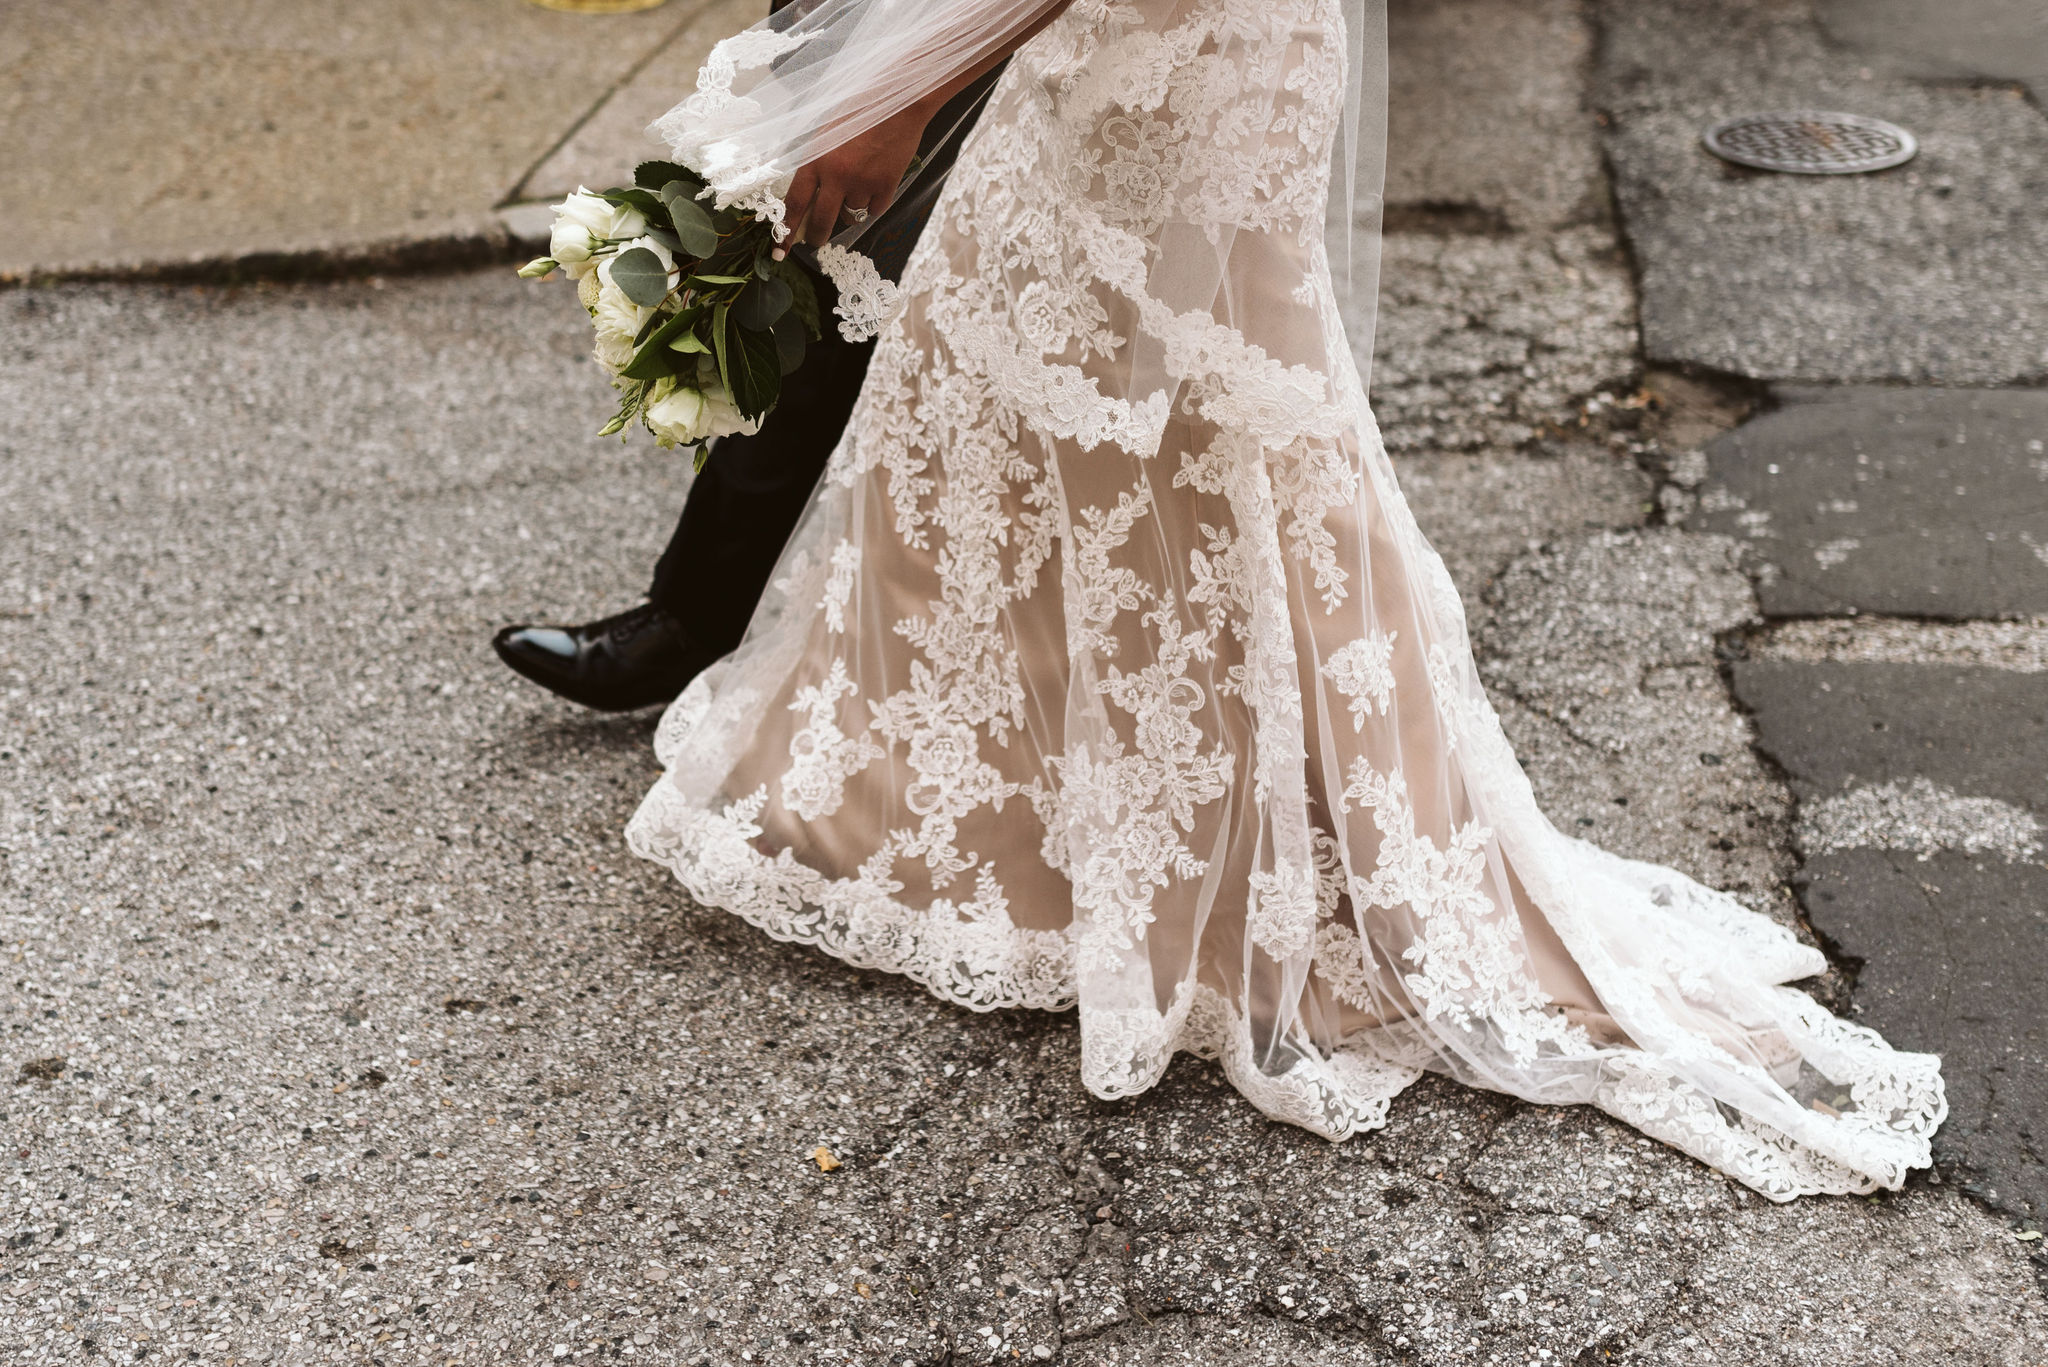  Baltimore, Maryland Wedding Photographer, Mount Vernon, Chase Court, Classic, Outdoor Ceremony, Garden, Romantic, Detail of Bride and groom’s Feet While Walking Together, Lace Wedding Gown with Train 